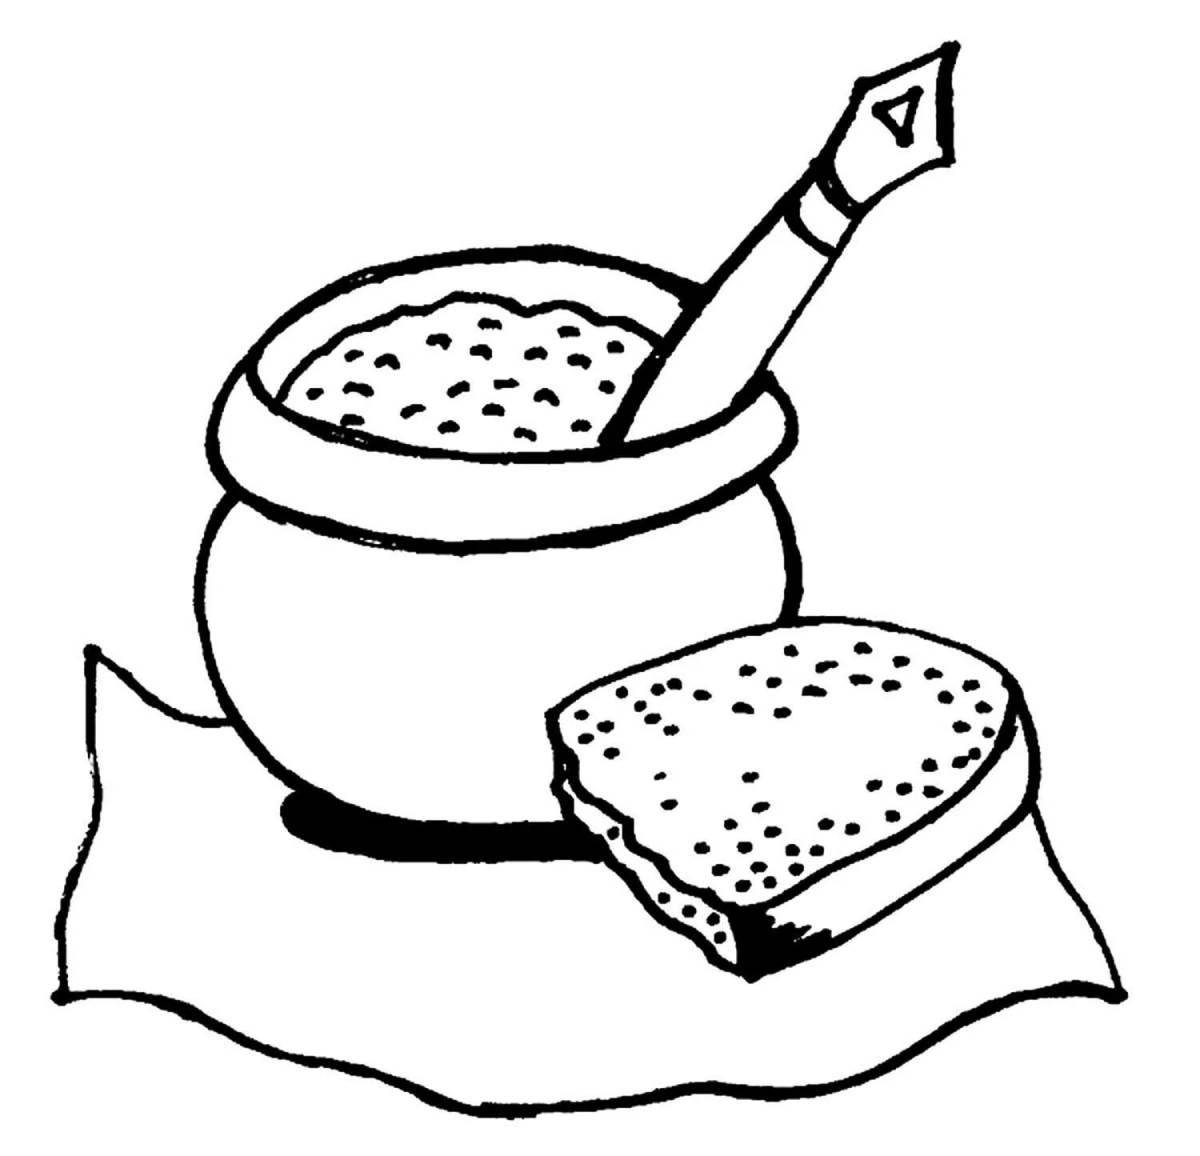 Charming oatmeal coloring book